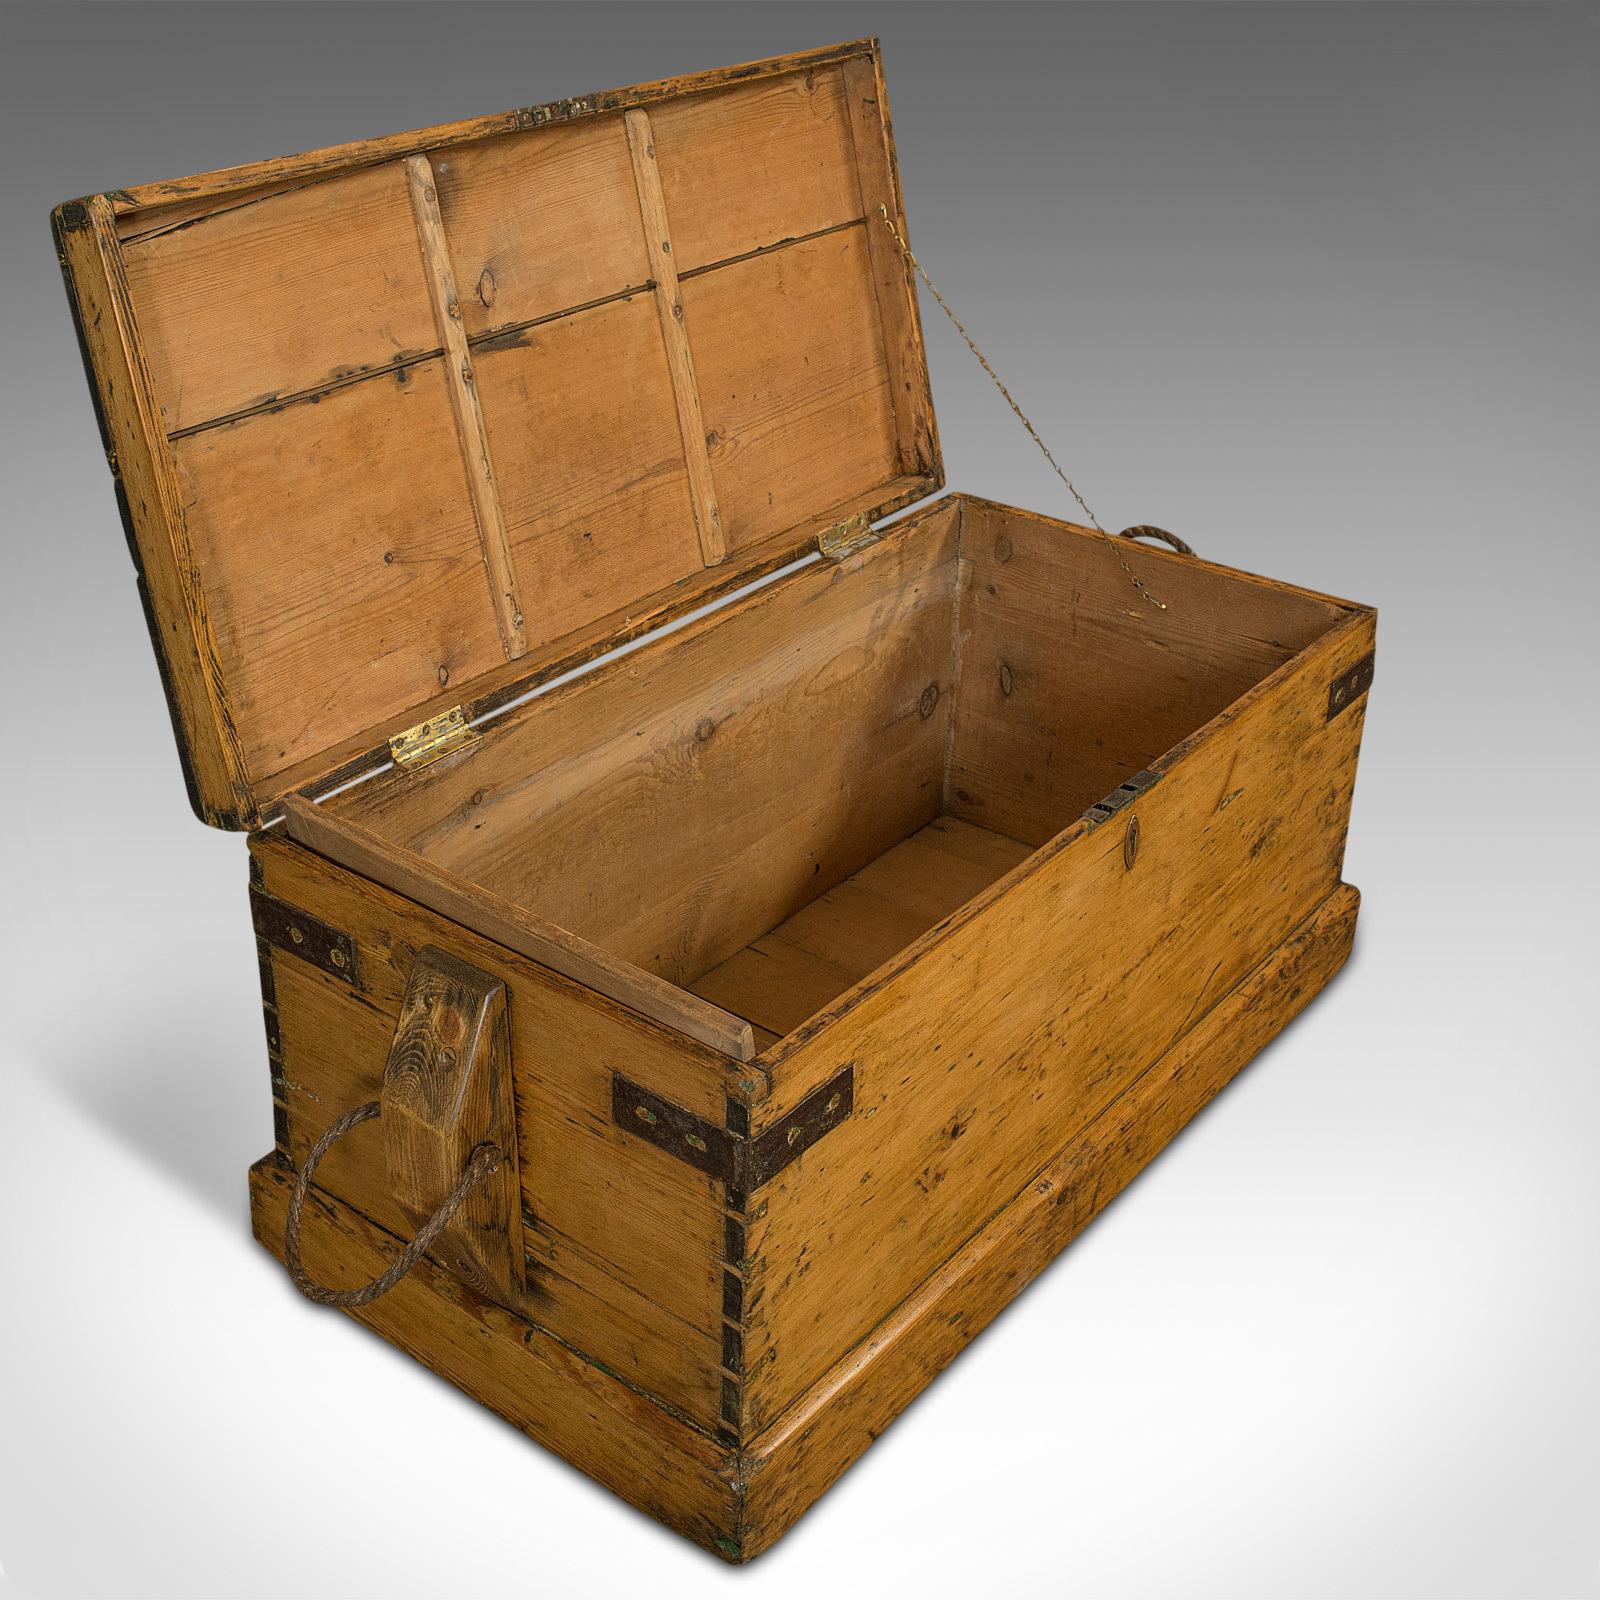 19th Century Antique Shipwright's Tool Chest, English, Maritime, Craftsman, Trunk, Victorian